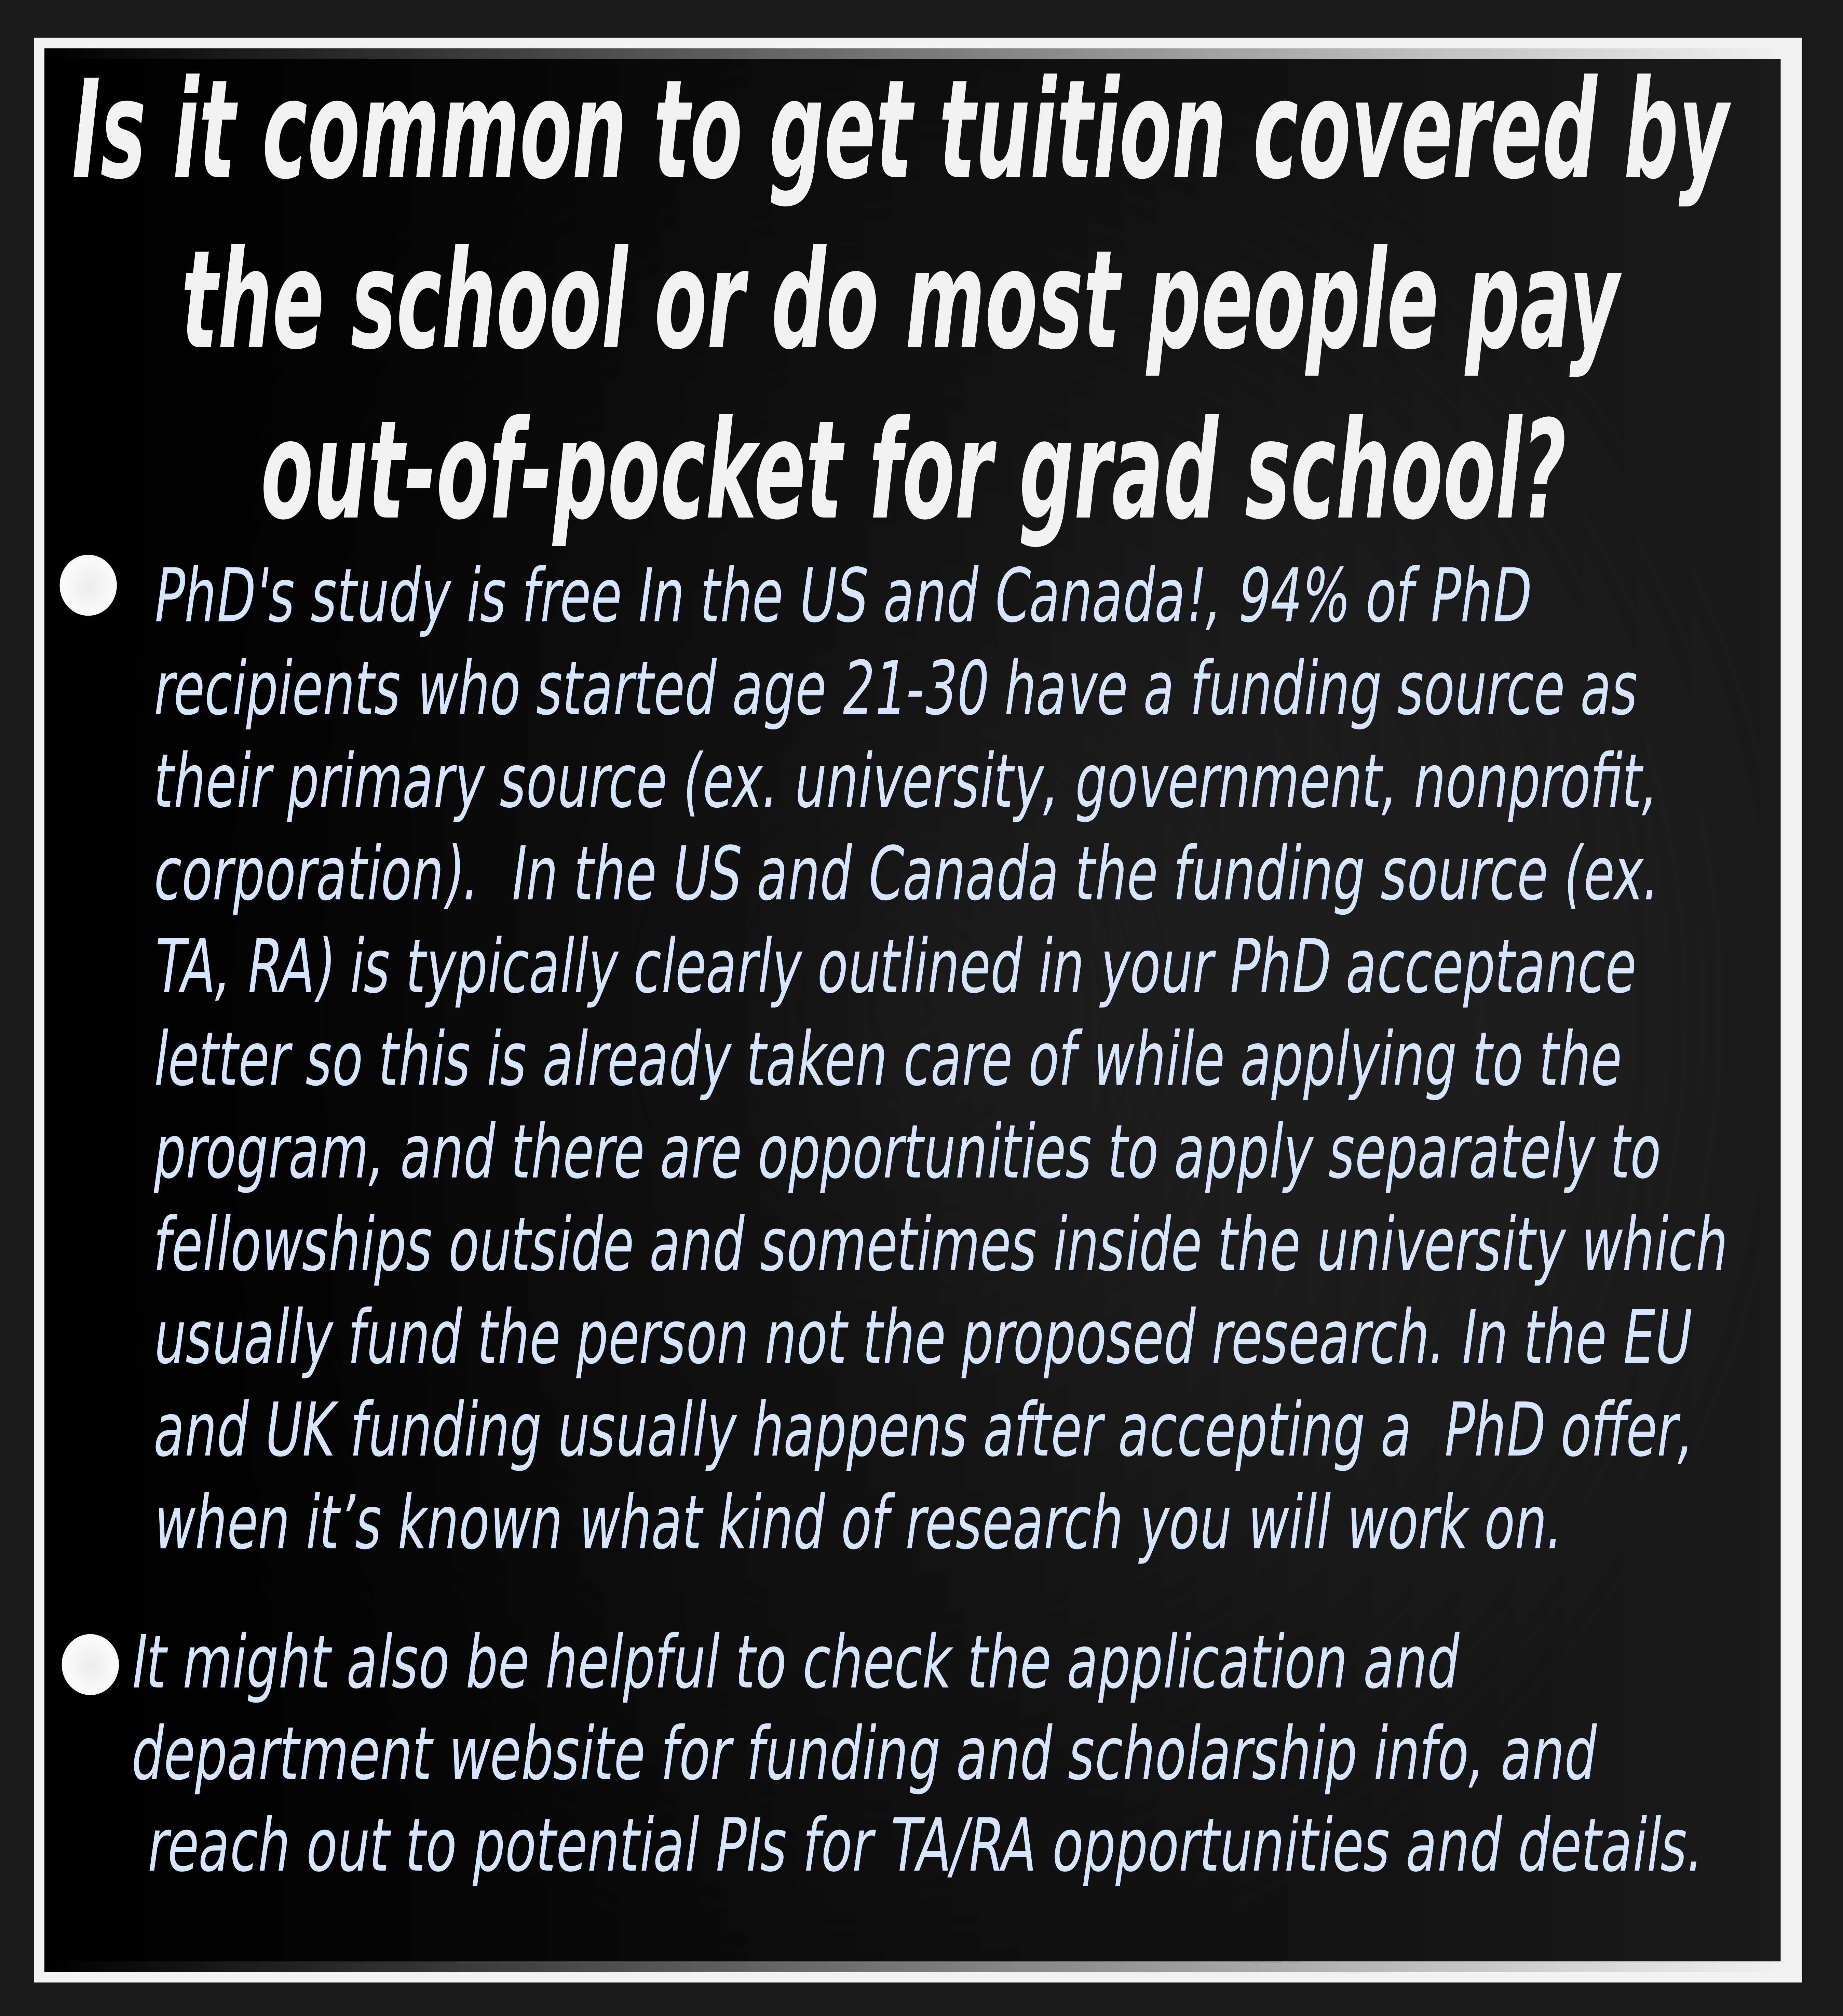 Is it common to get tuition covered by the school or do most people pay out of pocket for grad school?